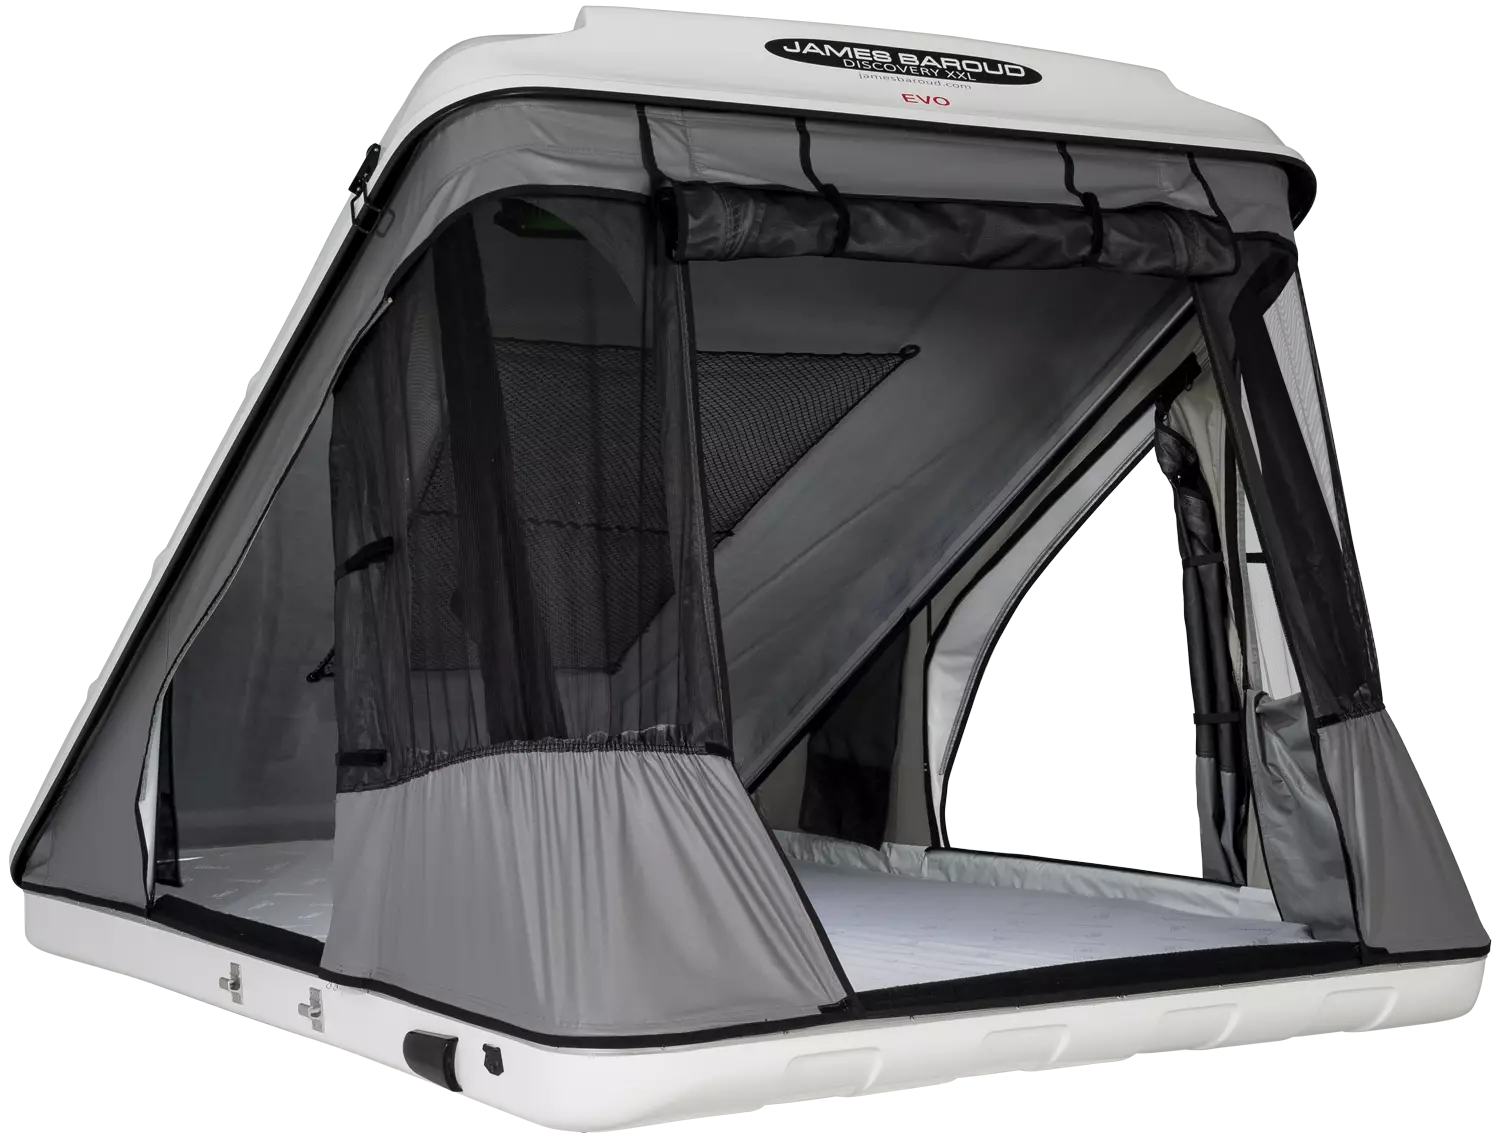 James Baroud Space White rear angle open windows